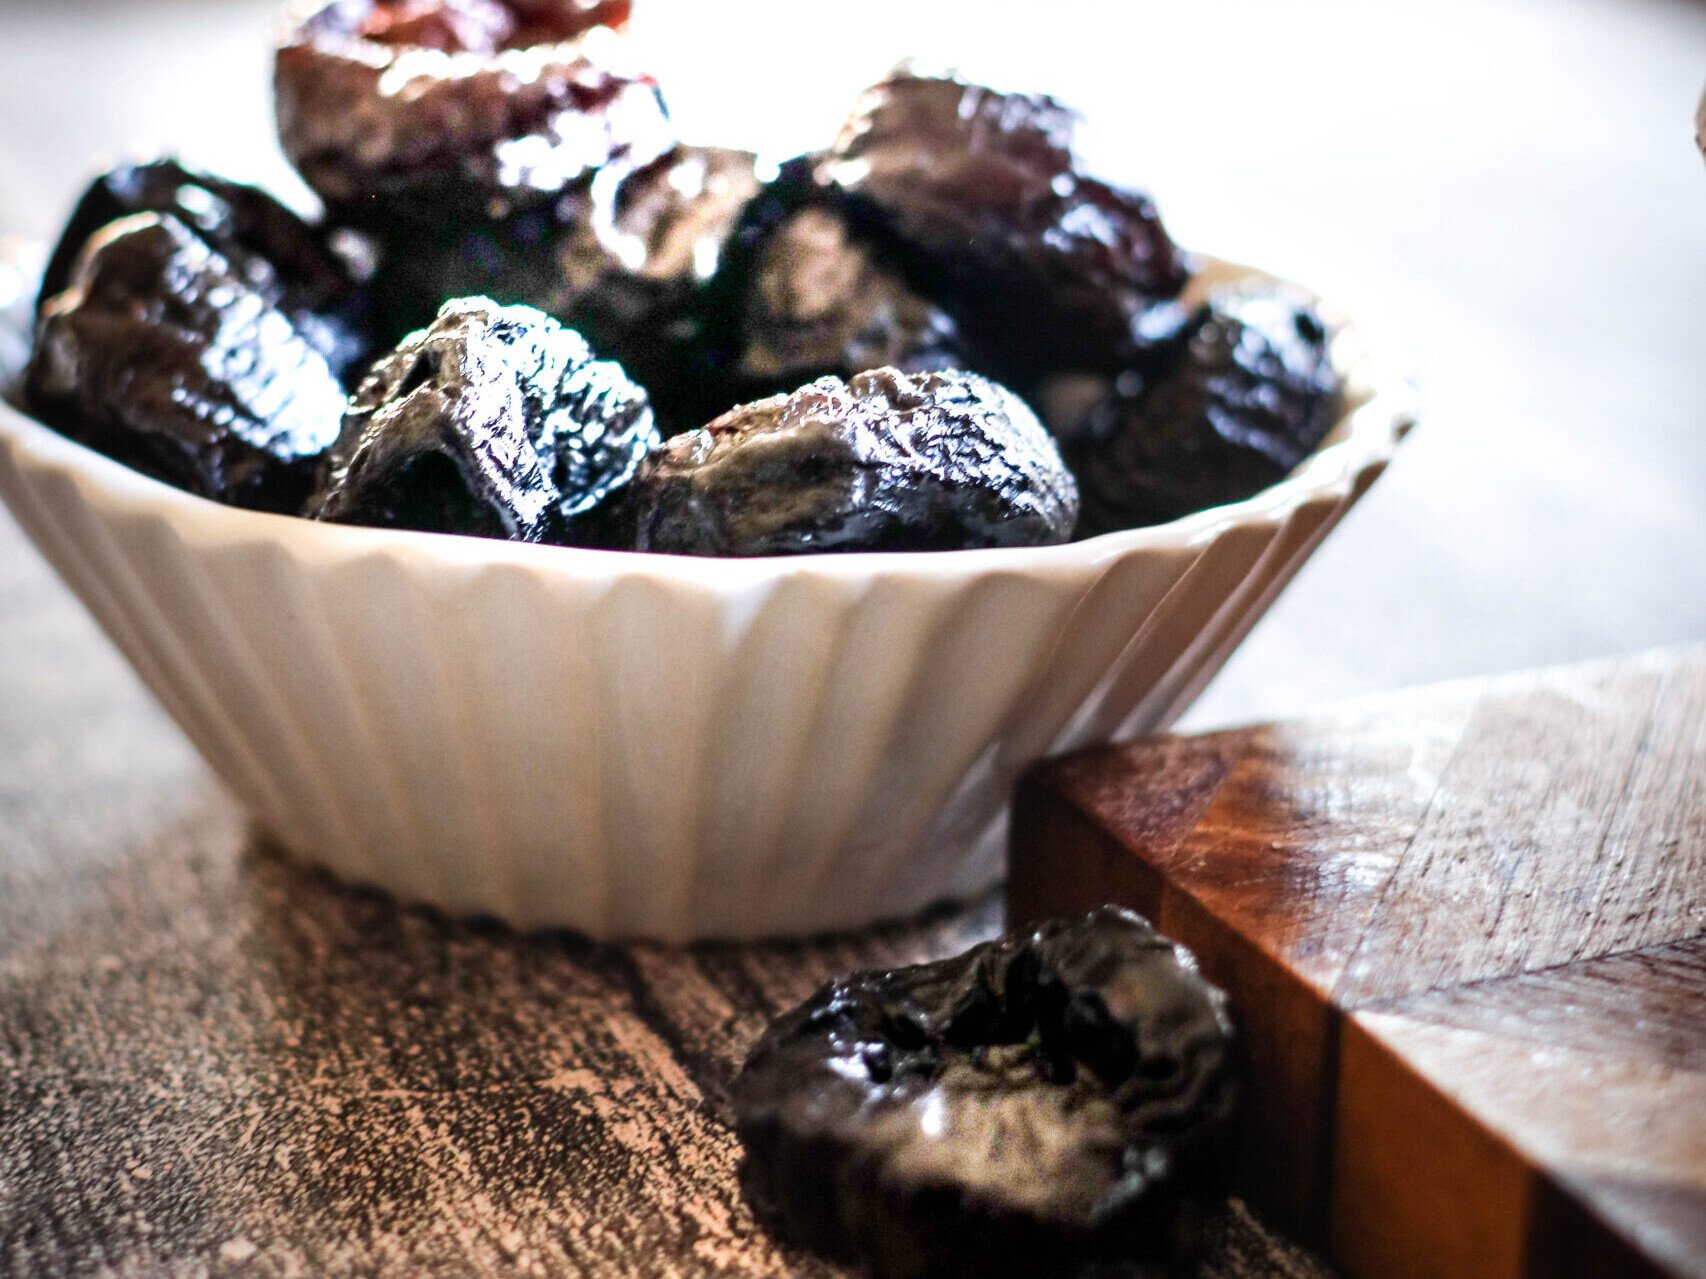 bowl of prunes. Prune puree is the base for this chocolate truffle recipe